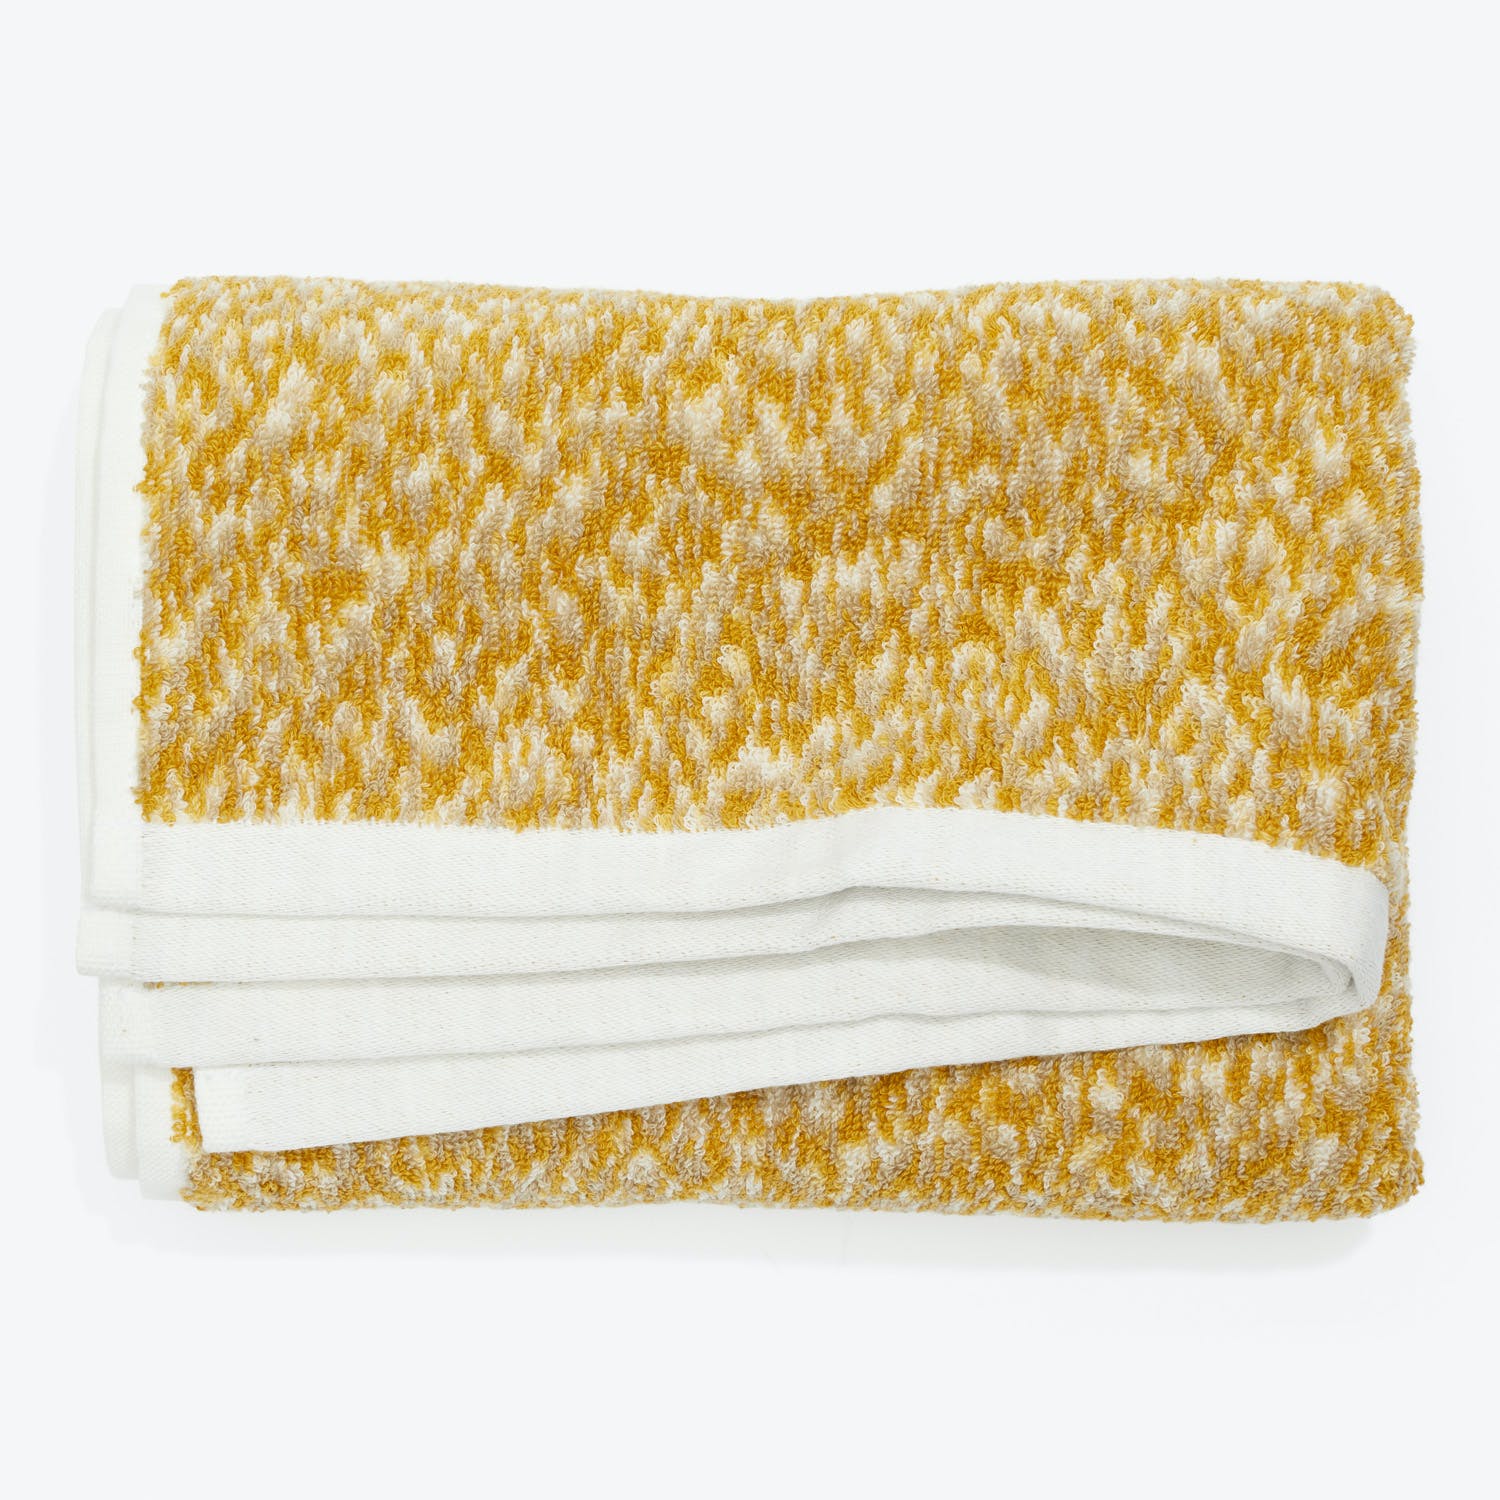 Folded plush towel with white and mustard-yellow patterned border.